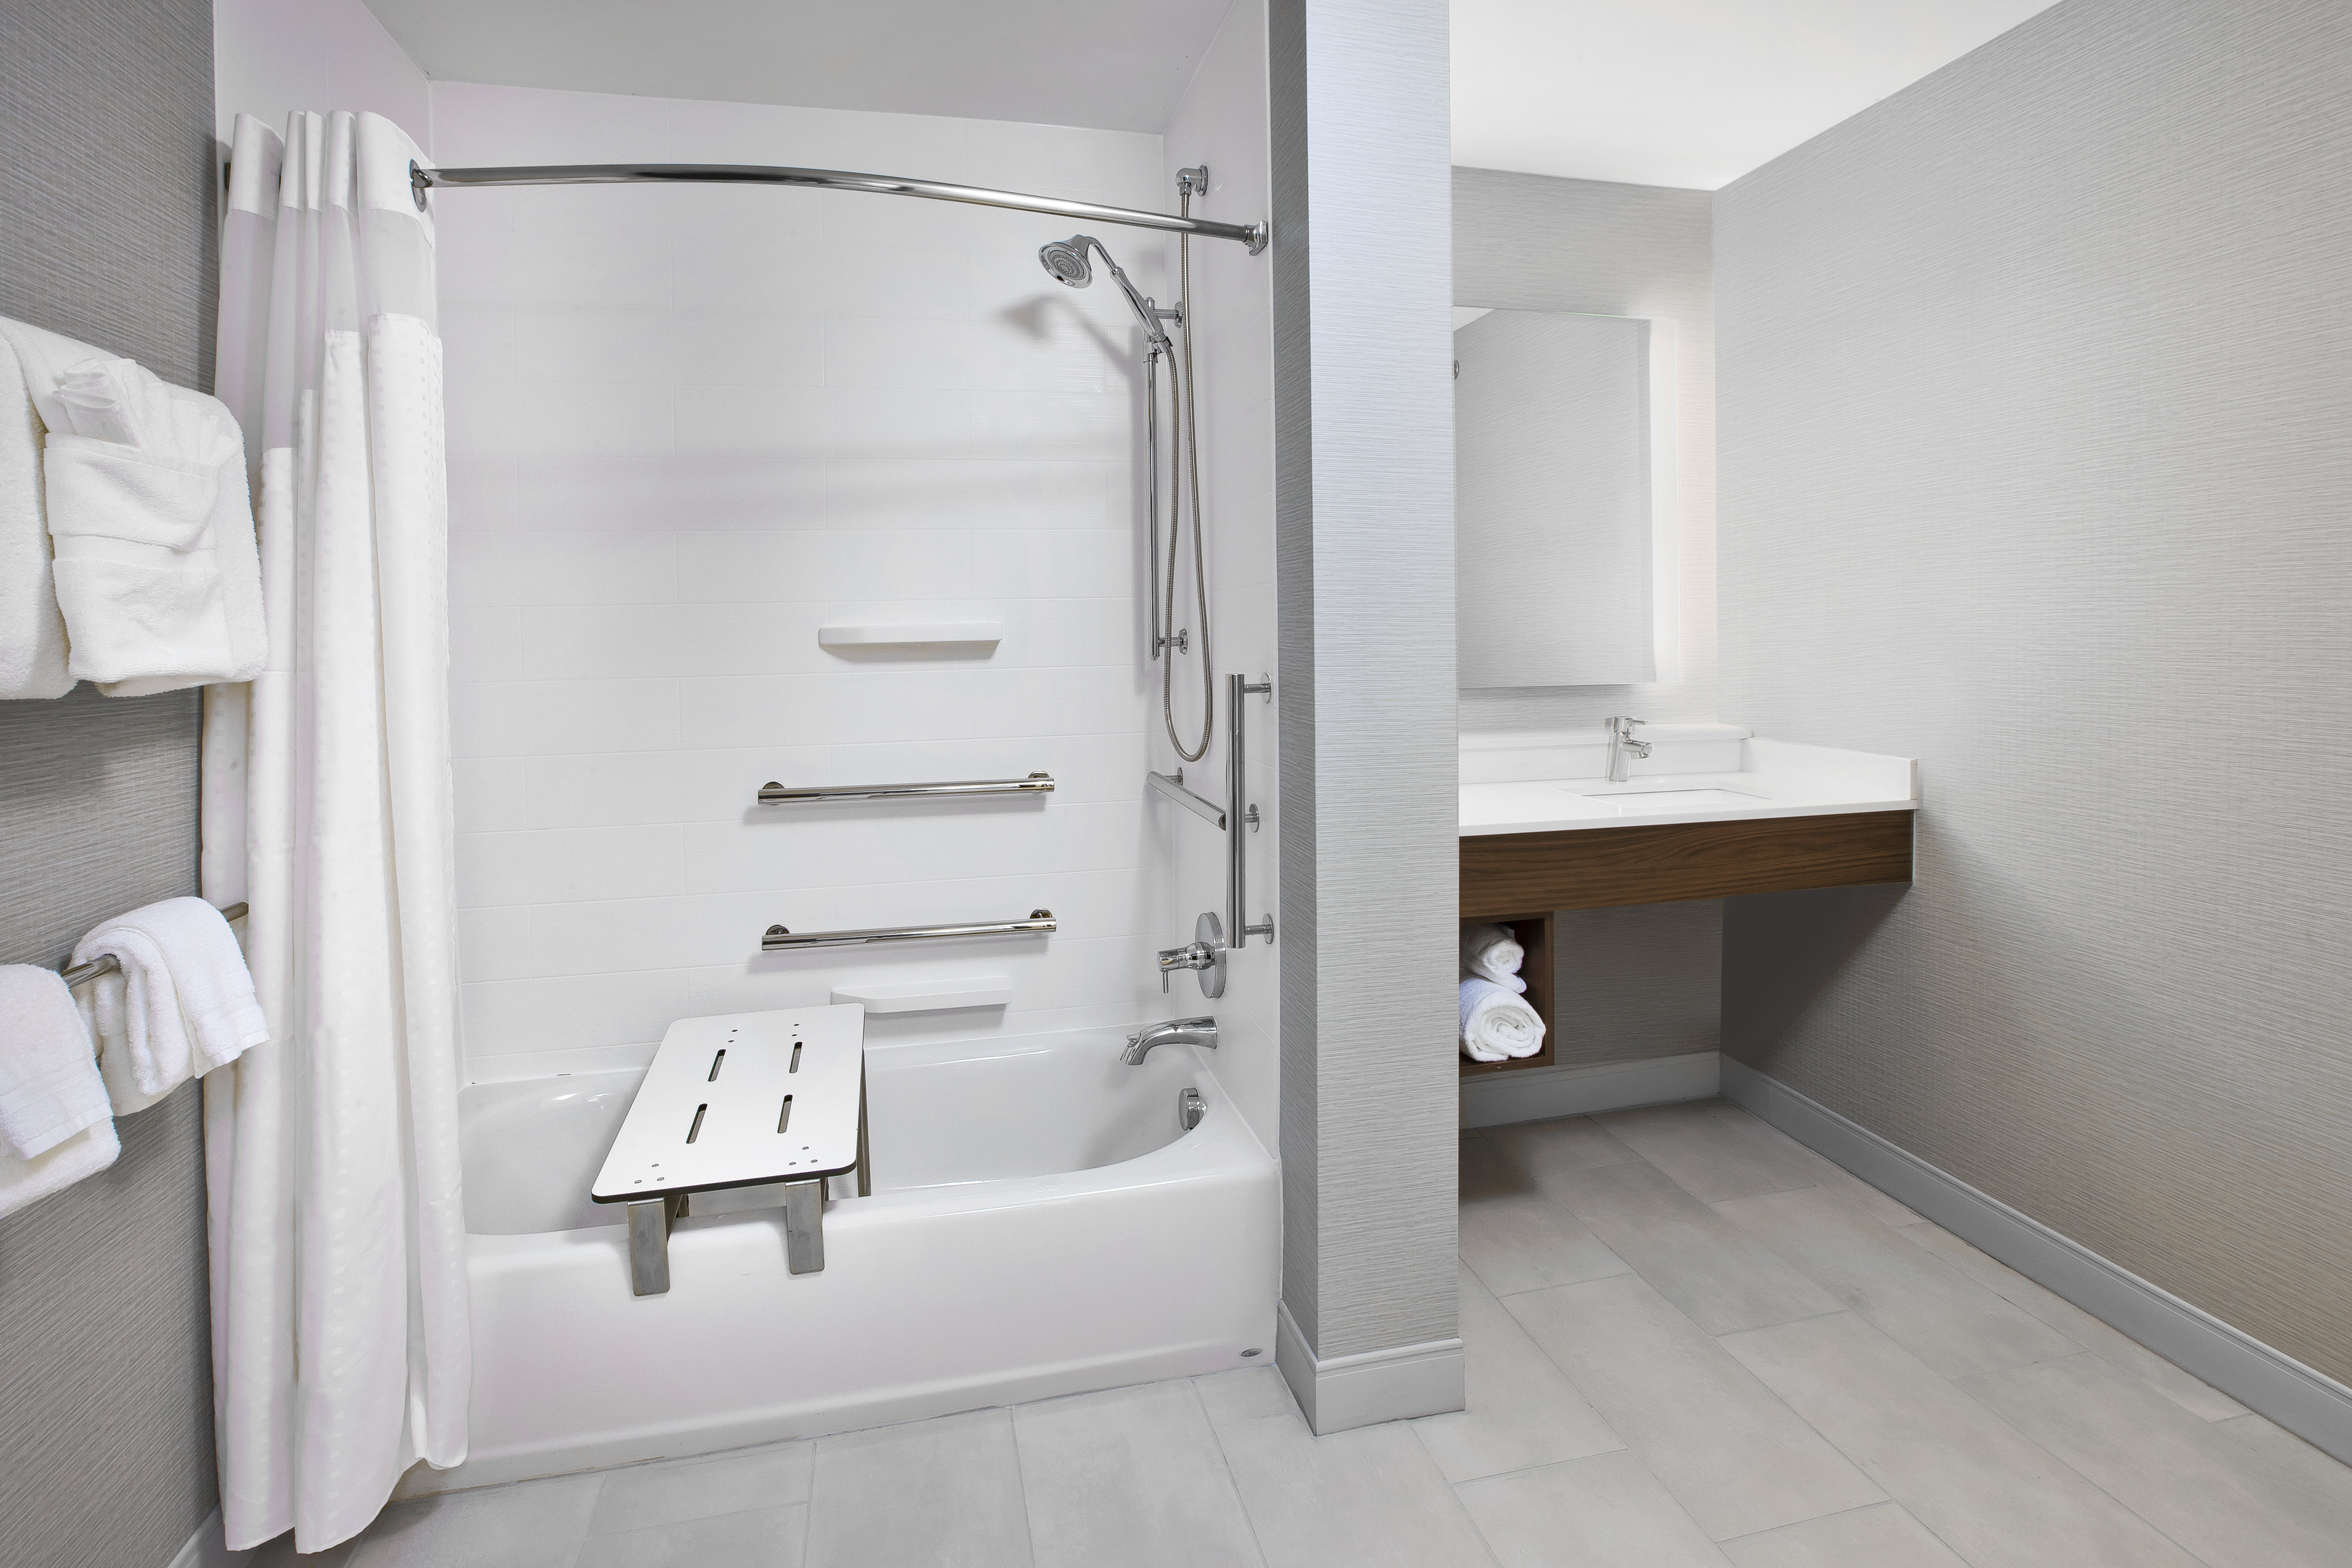 ADA compliant guest room with grab bars and adjustable shower.